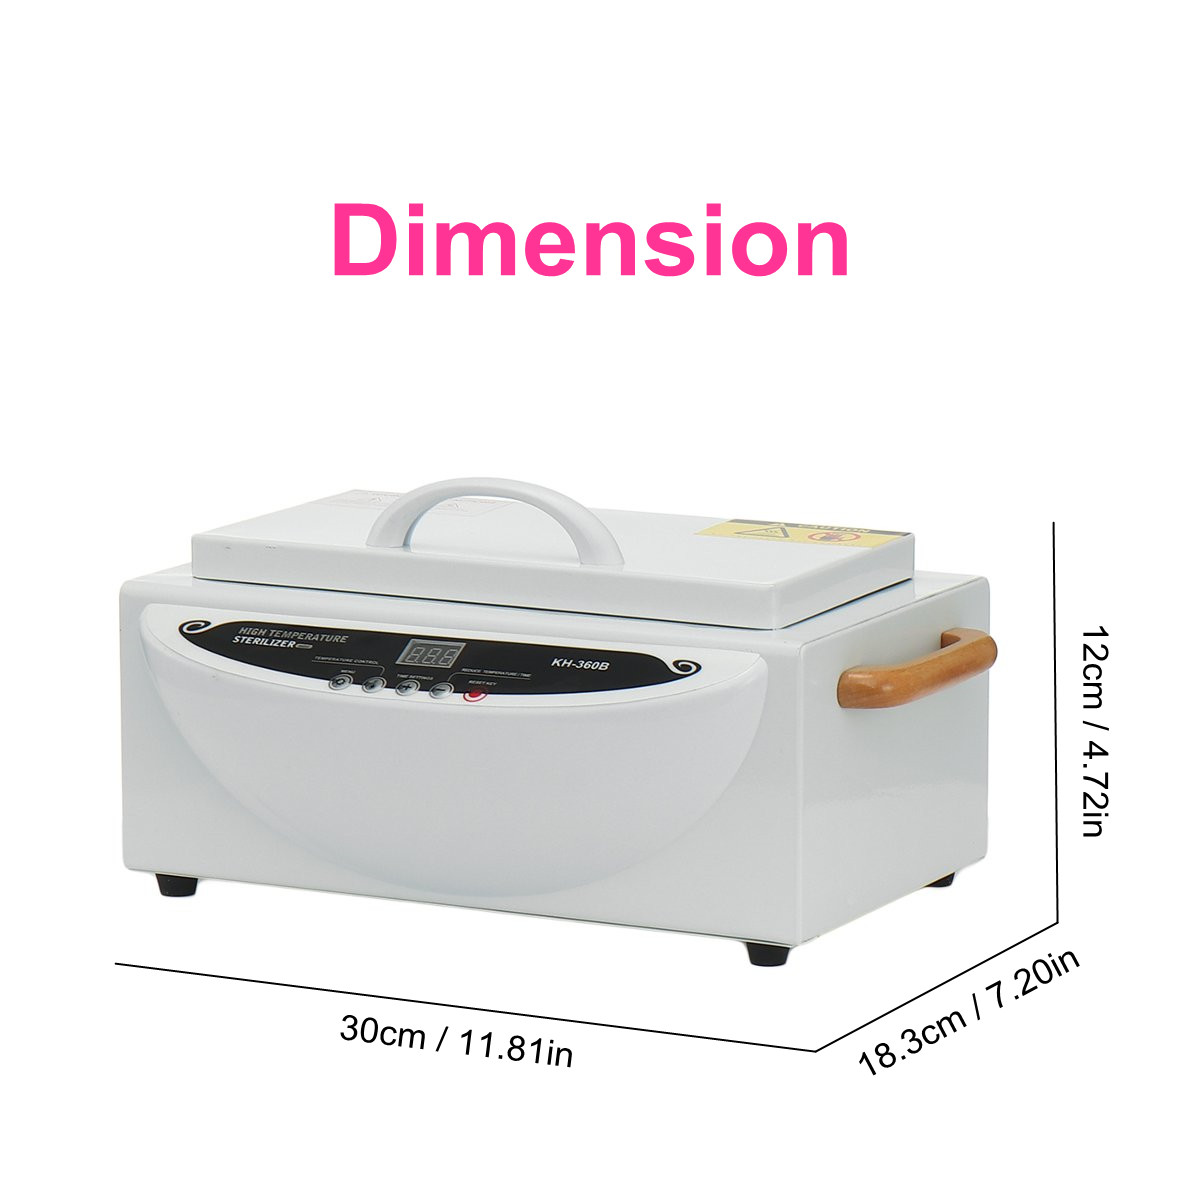 500W-110220V-Spa-Sterilizer-Beauty-Manicure-Nail-Tool-Cabinet-Disinfection-Box-1679830-4